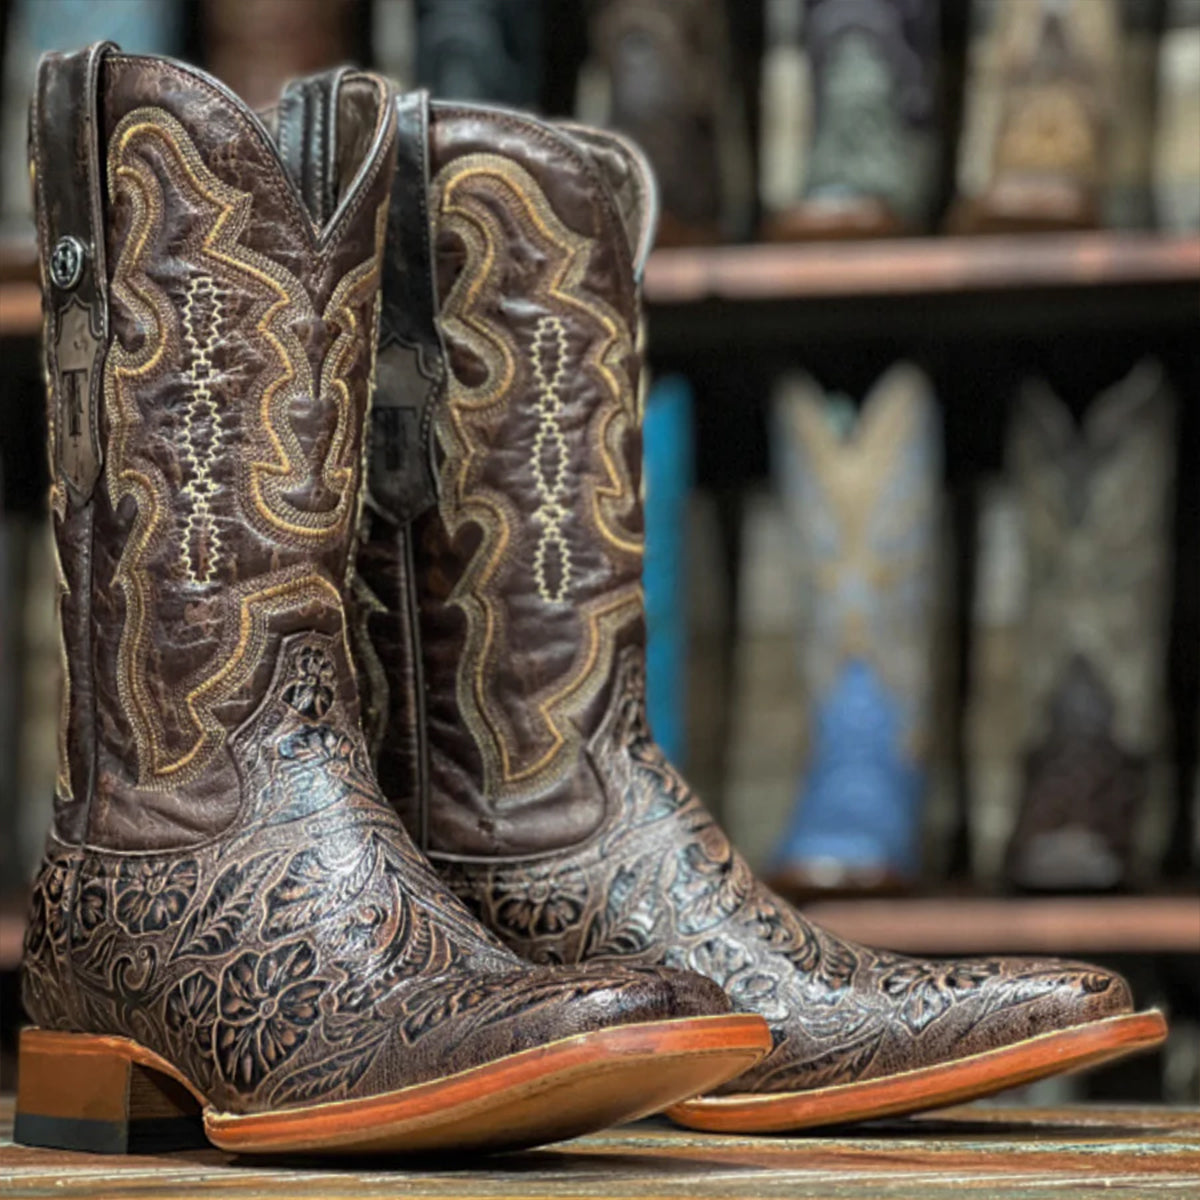 Mens handtooled boots by Tanner Mark Boots
